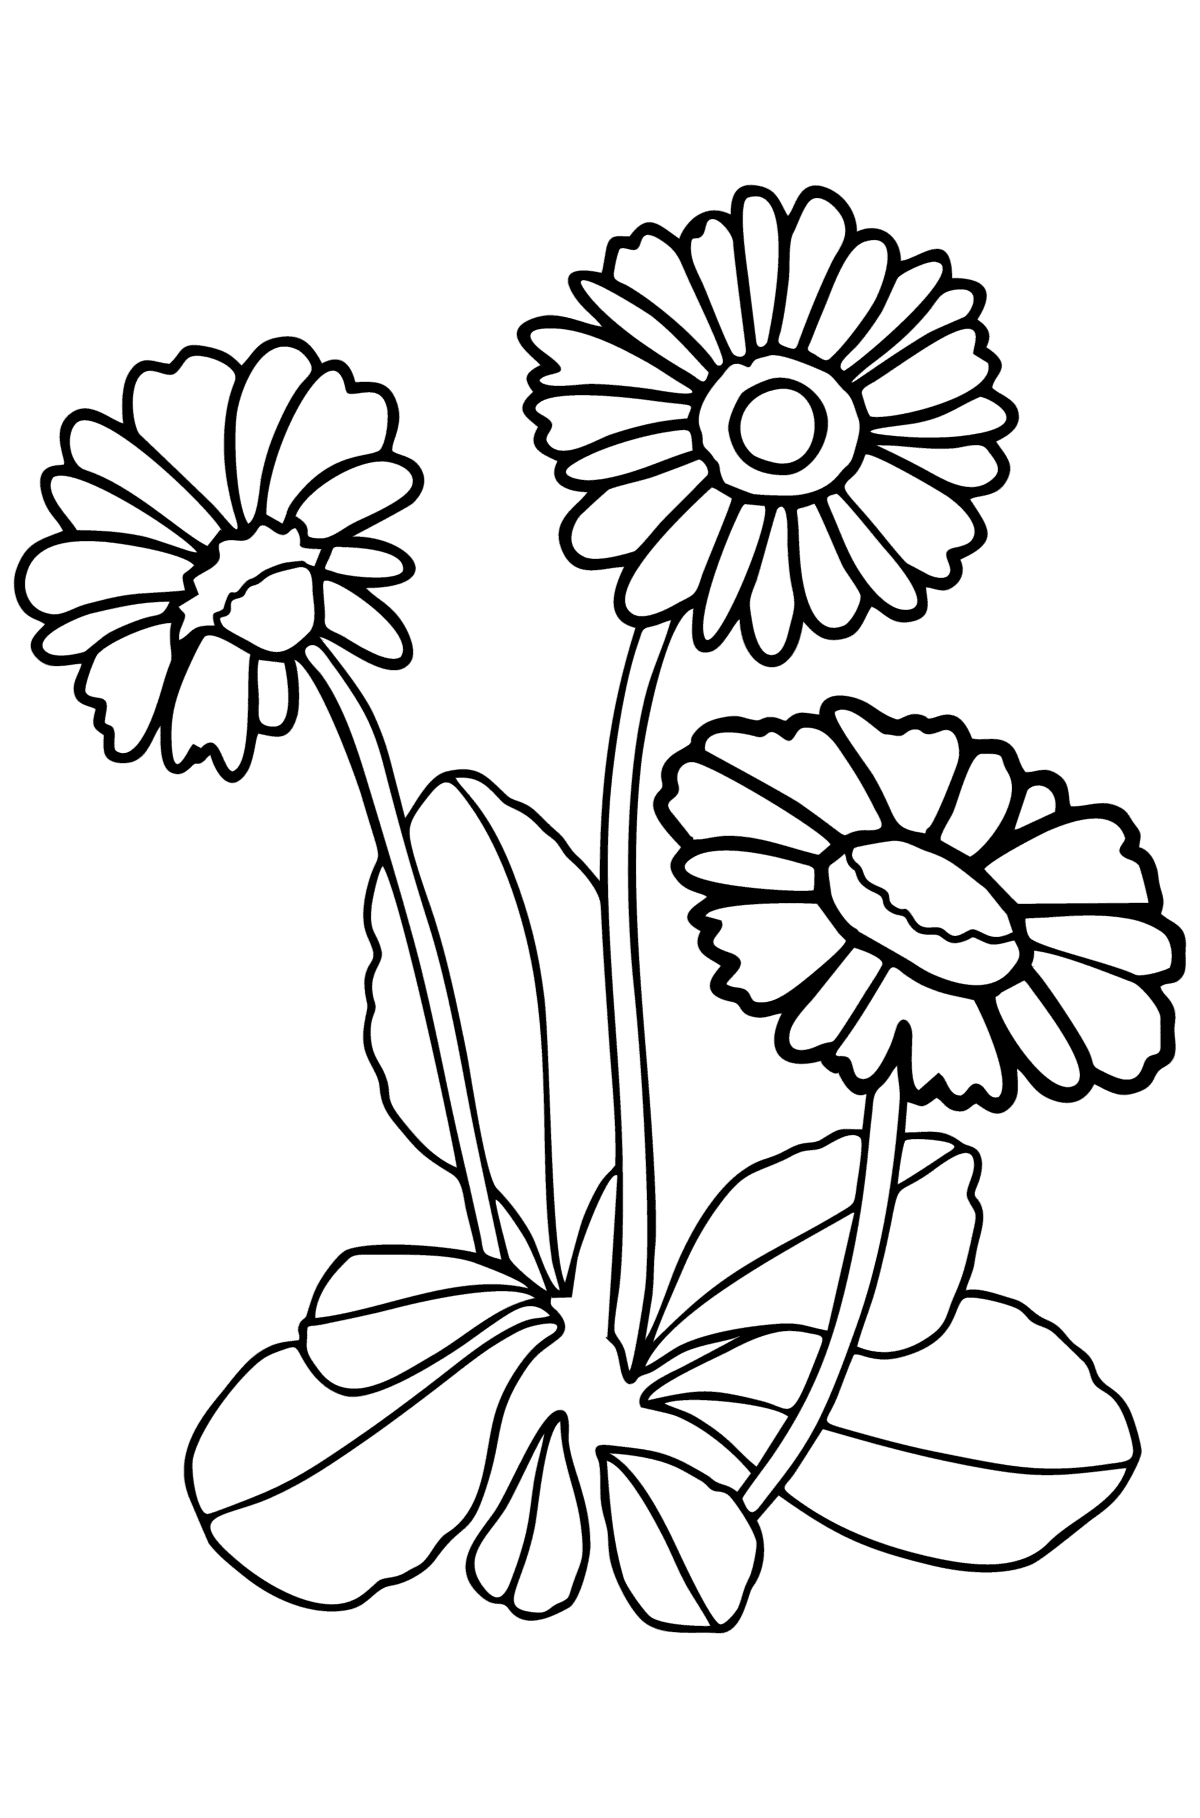 Daisy coloring page - Coloring Pages for Kids